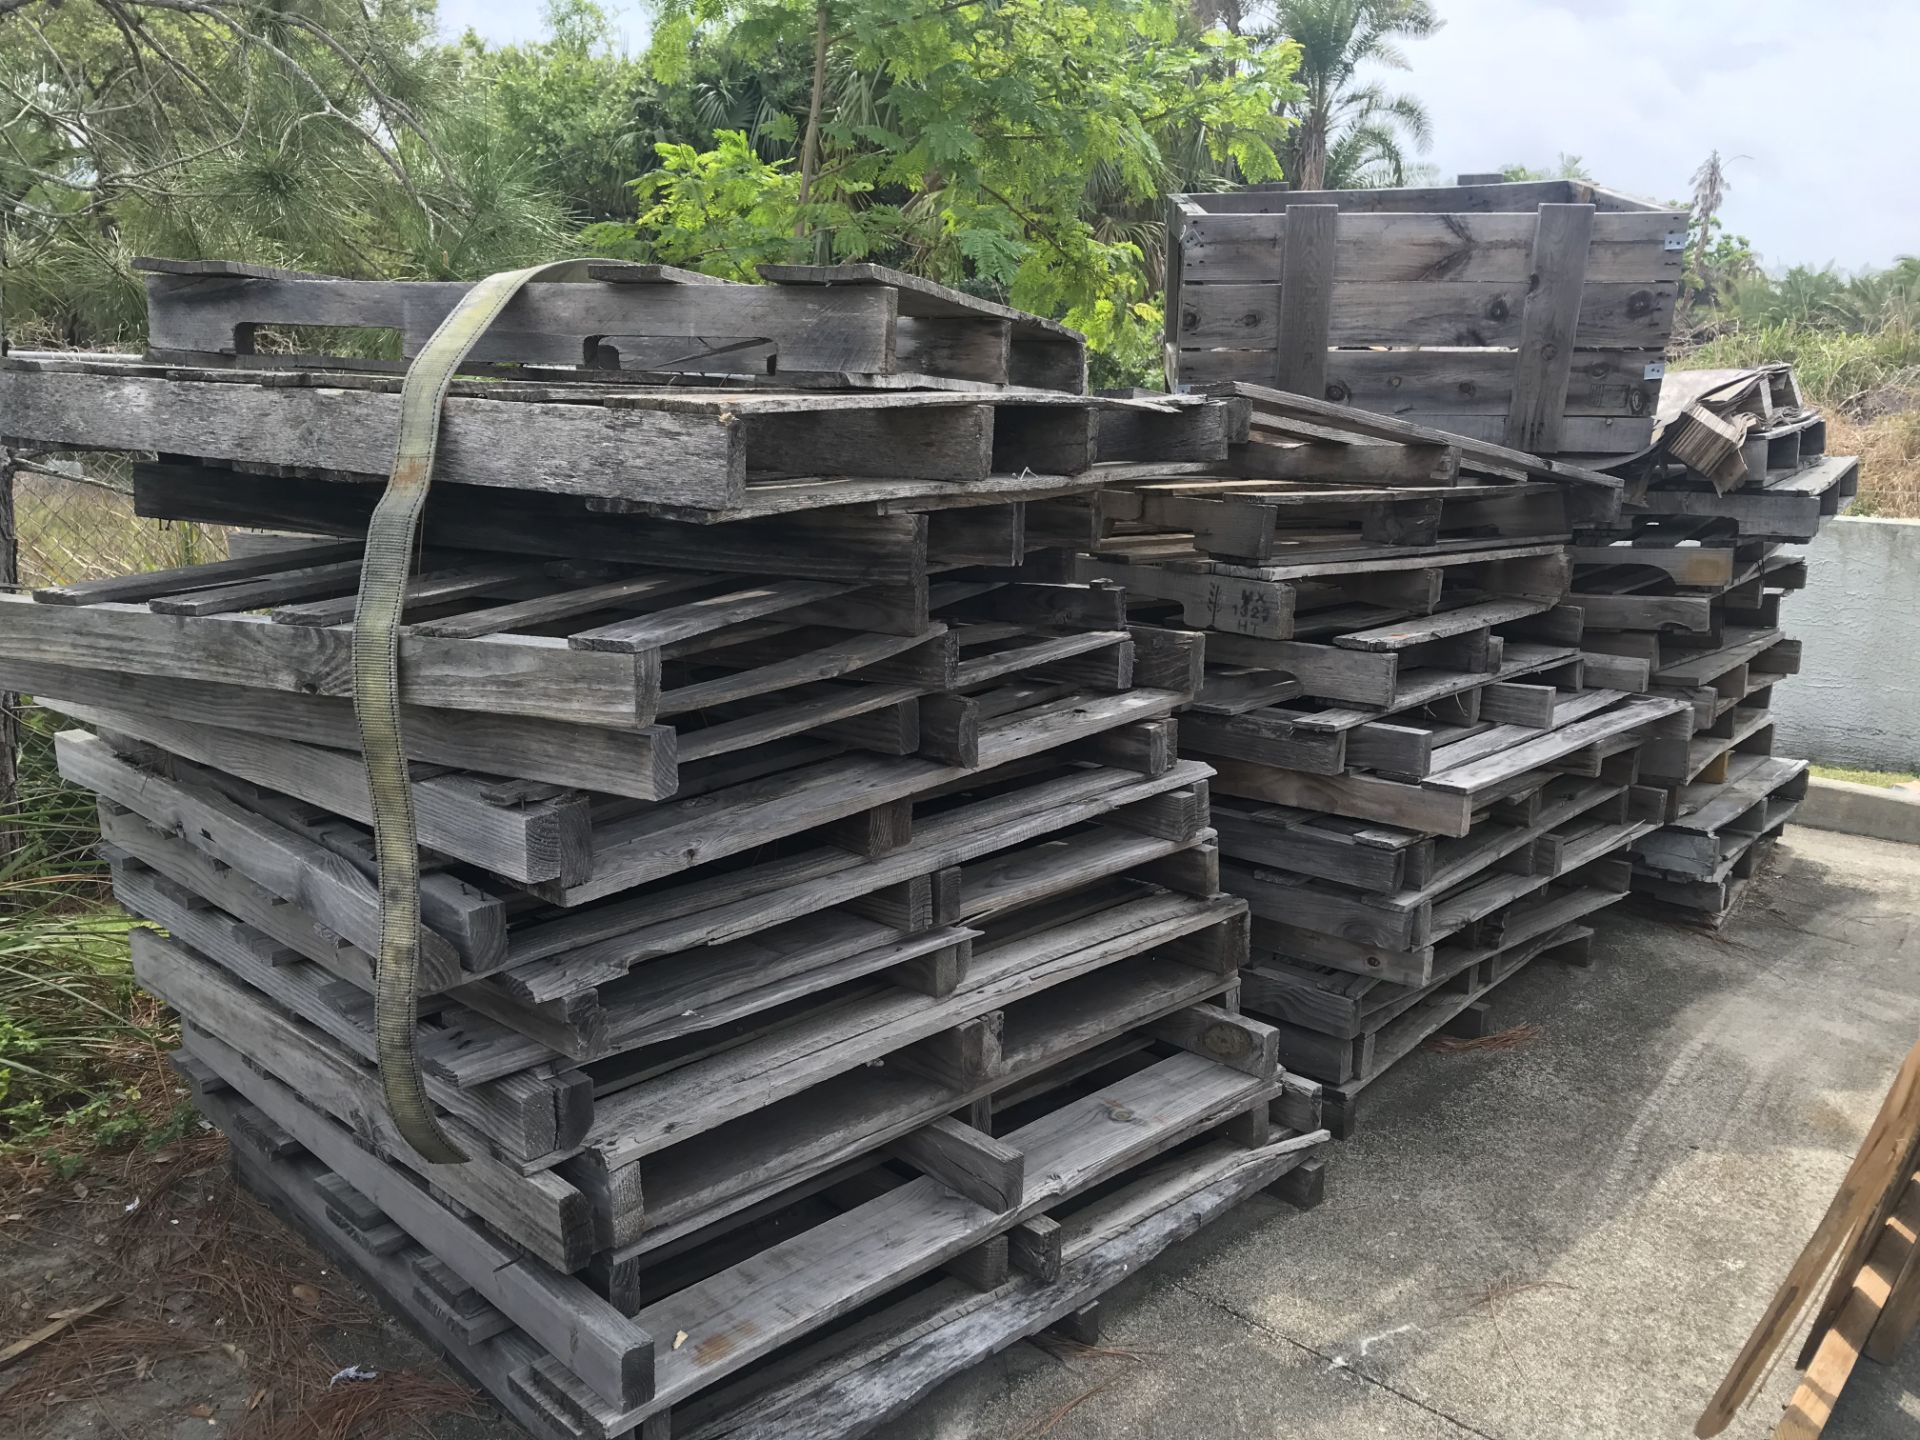 ALL PALLETS